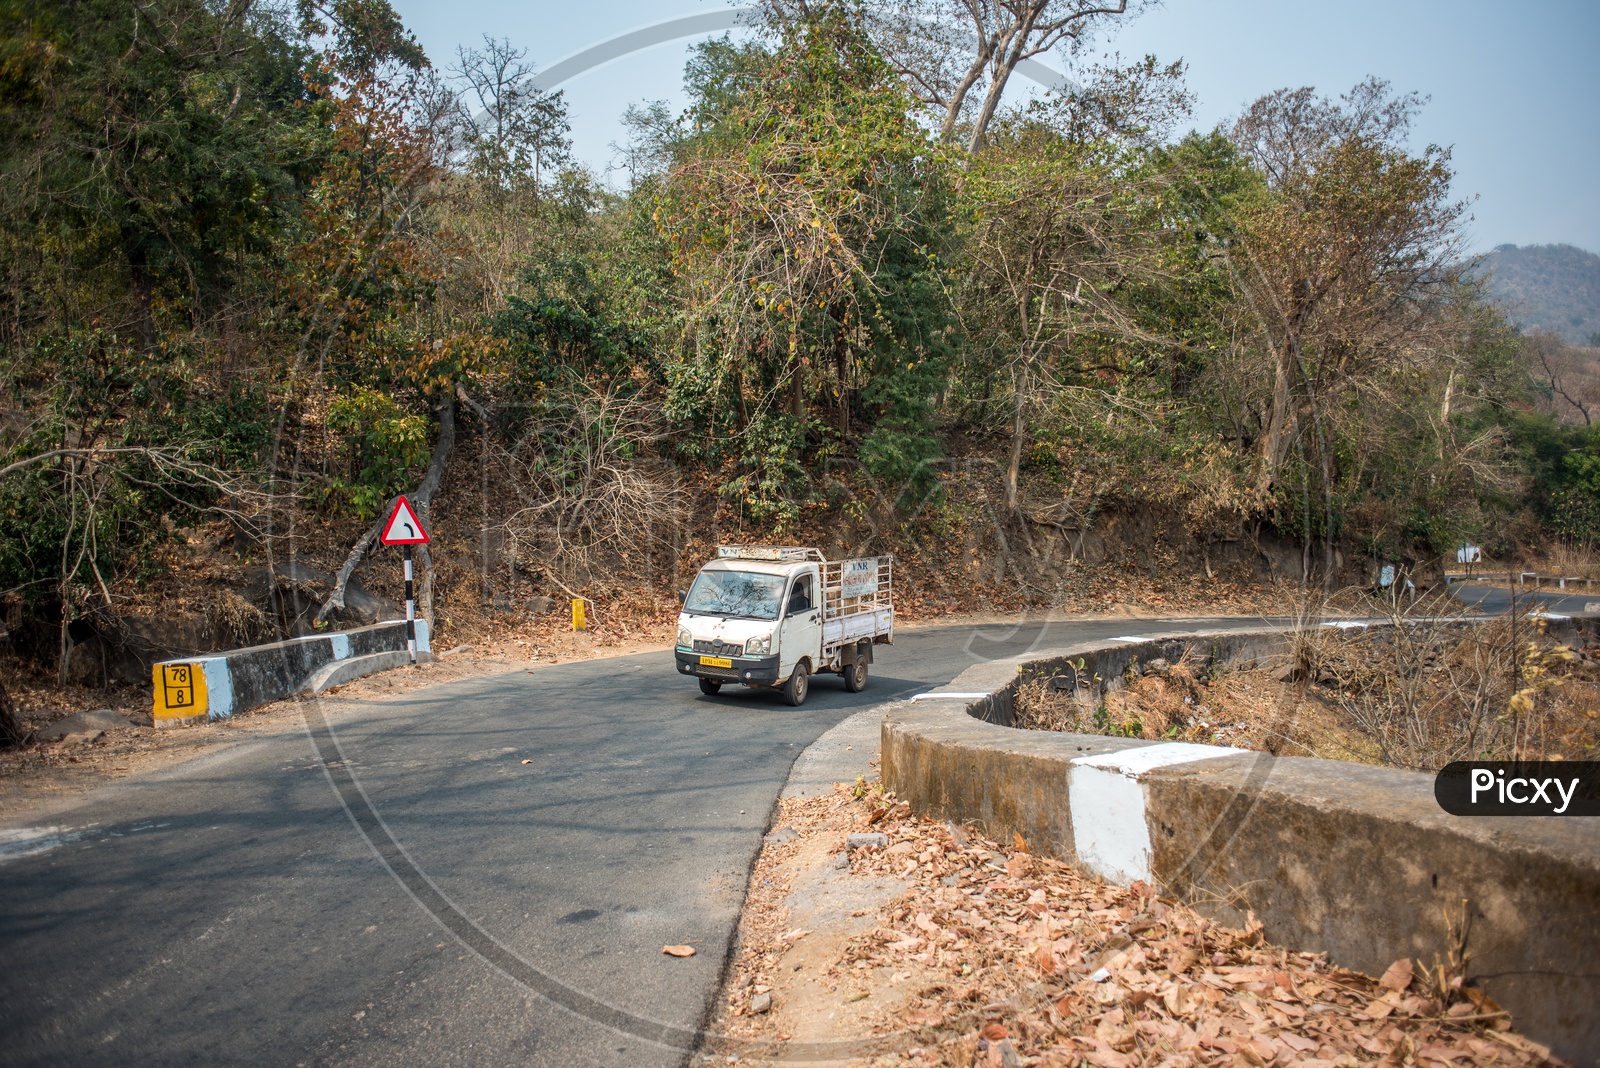 vehicles in the ghat